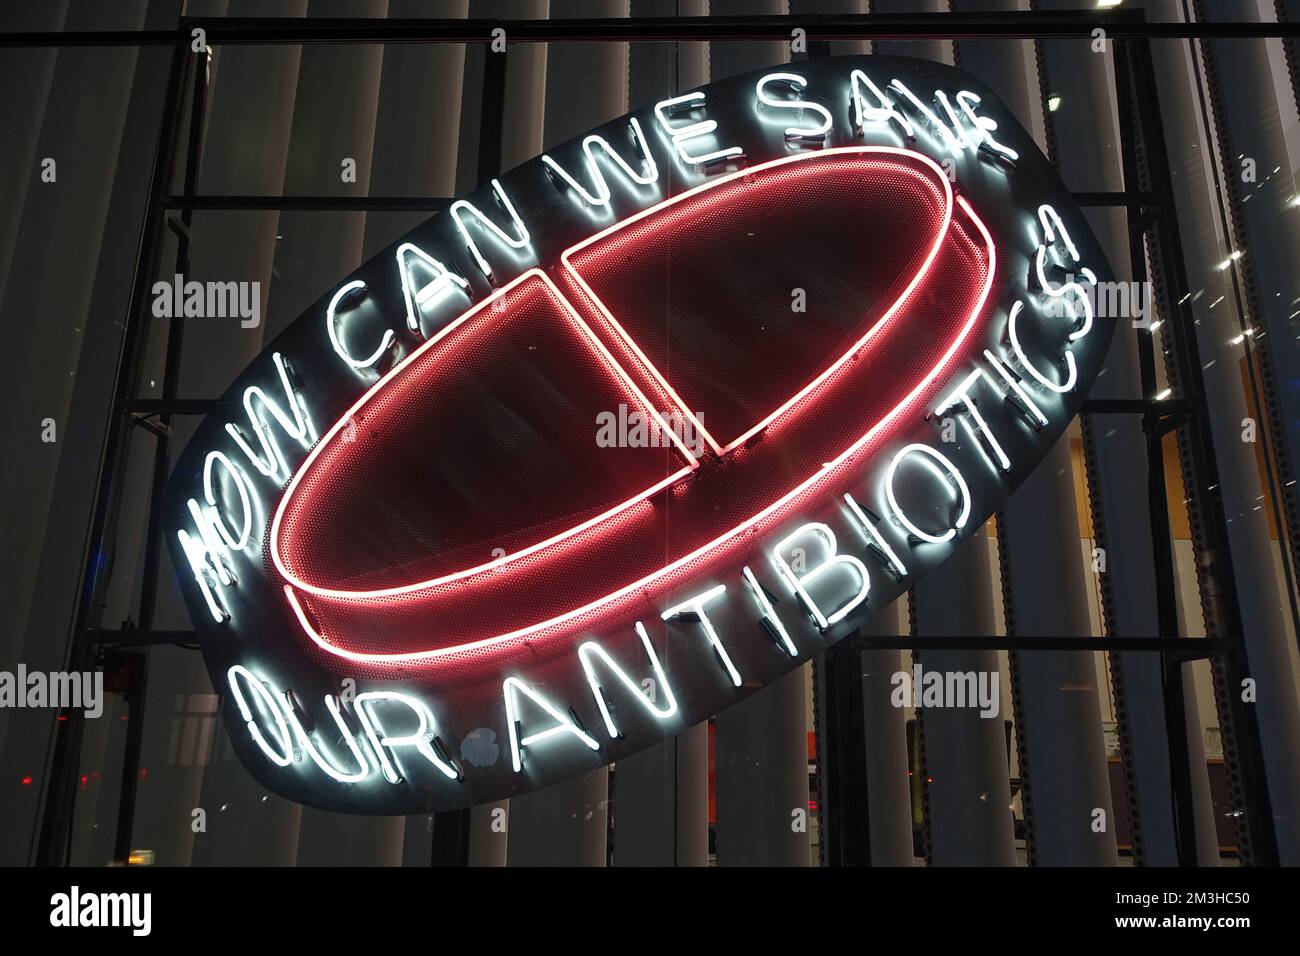 Advertising sign, Wellcome building, London, illustrating the fight to combat antibiotic resistance Stock Photo